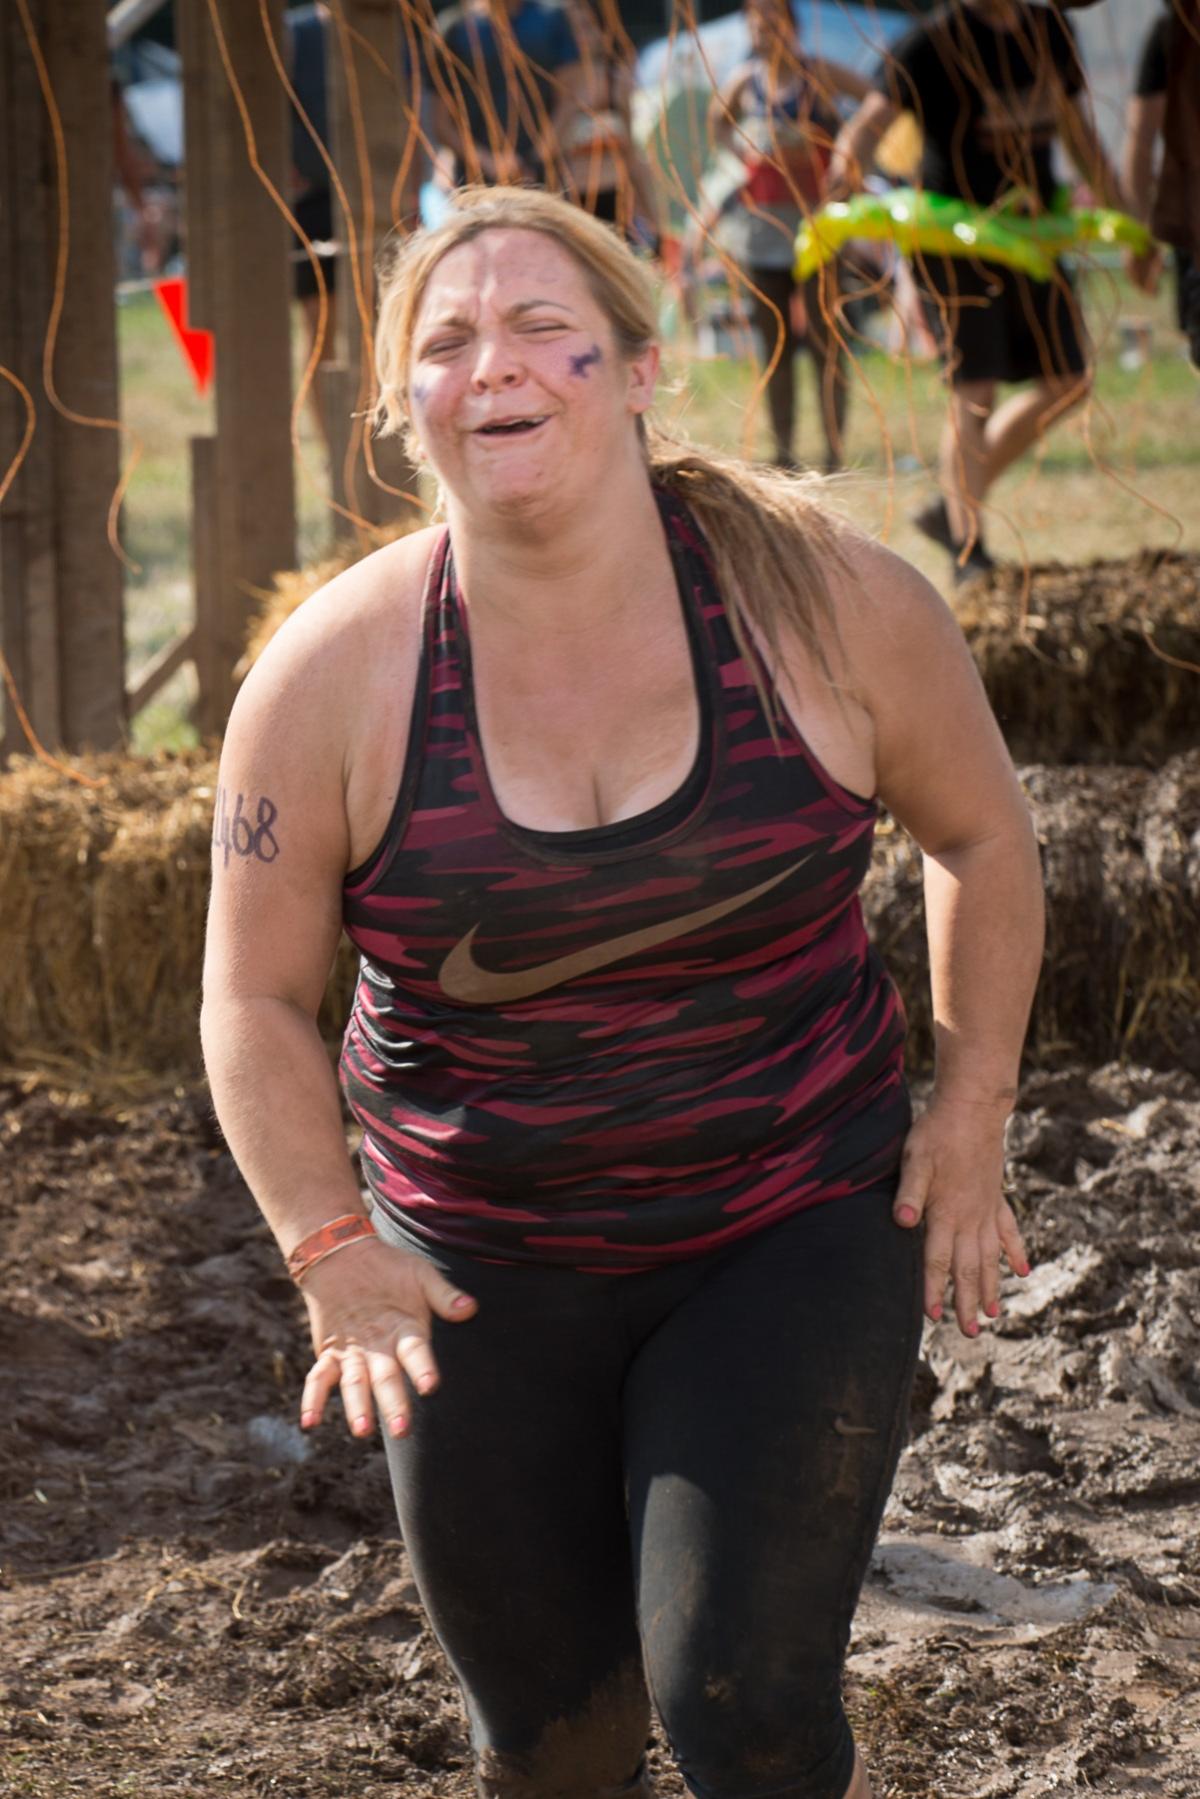 Photos from Tough Mudder South West 2015 in Cirencester Park. Picture by Richard McCleery.